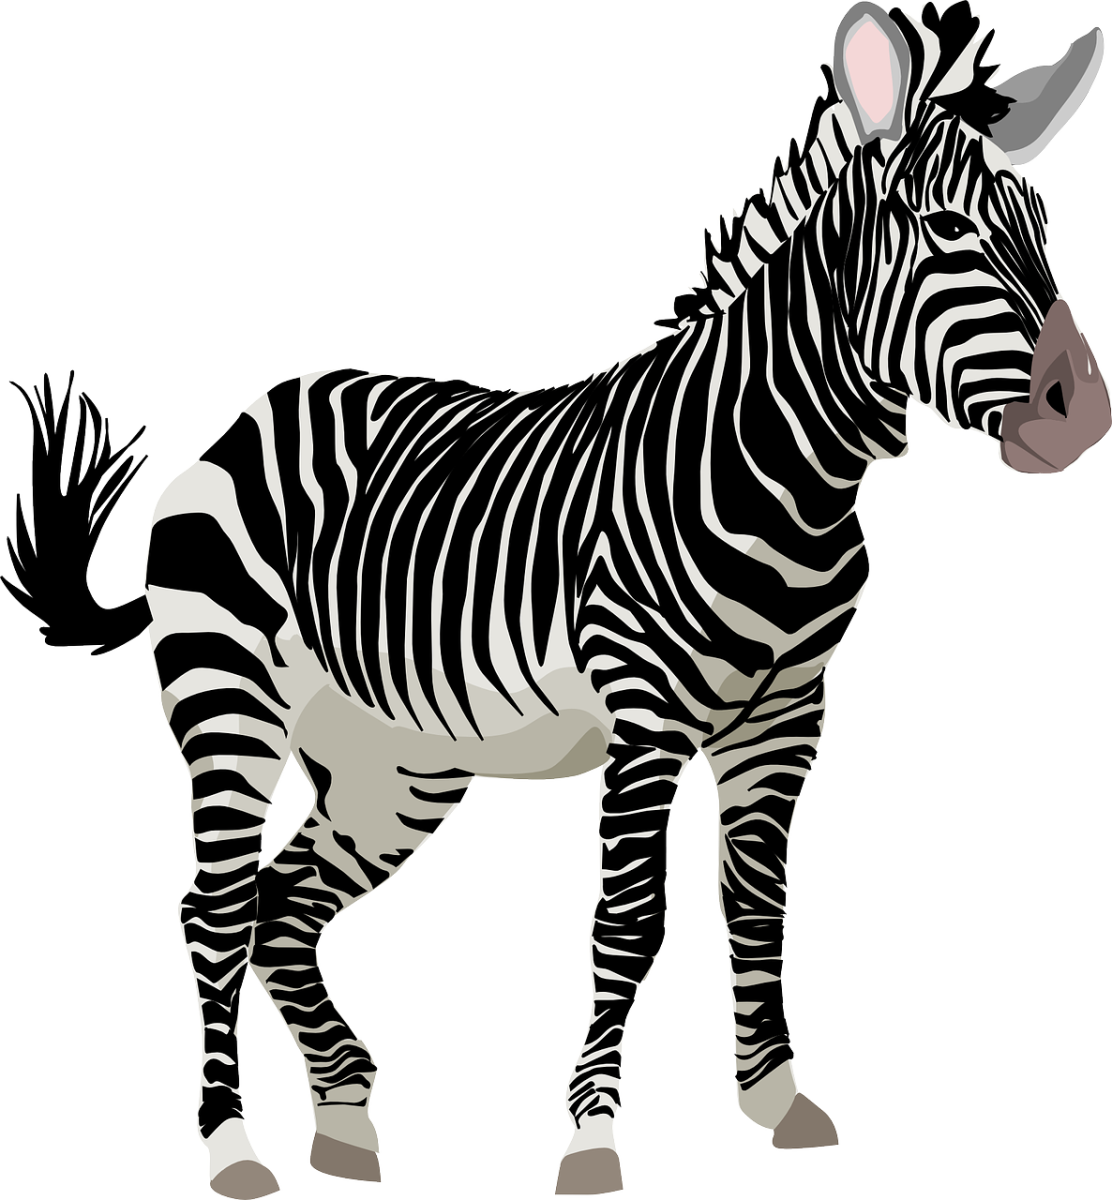 Zebra: Image by OpenClipart-Vectors from Pixabay